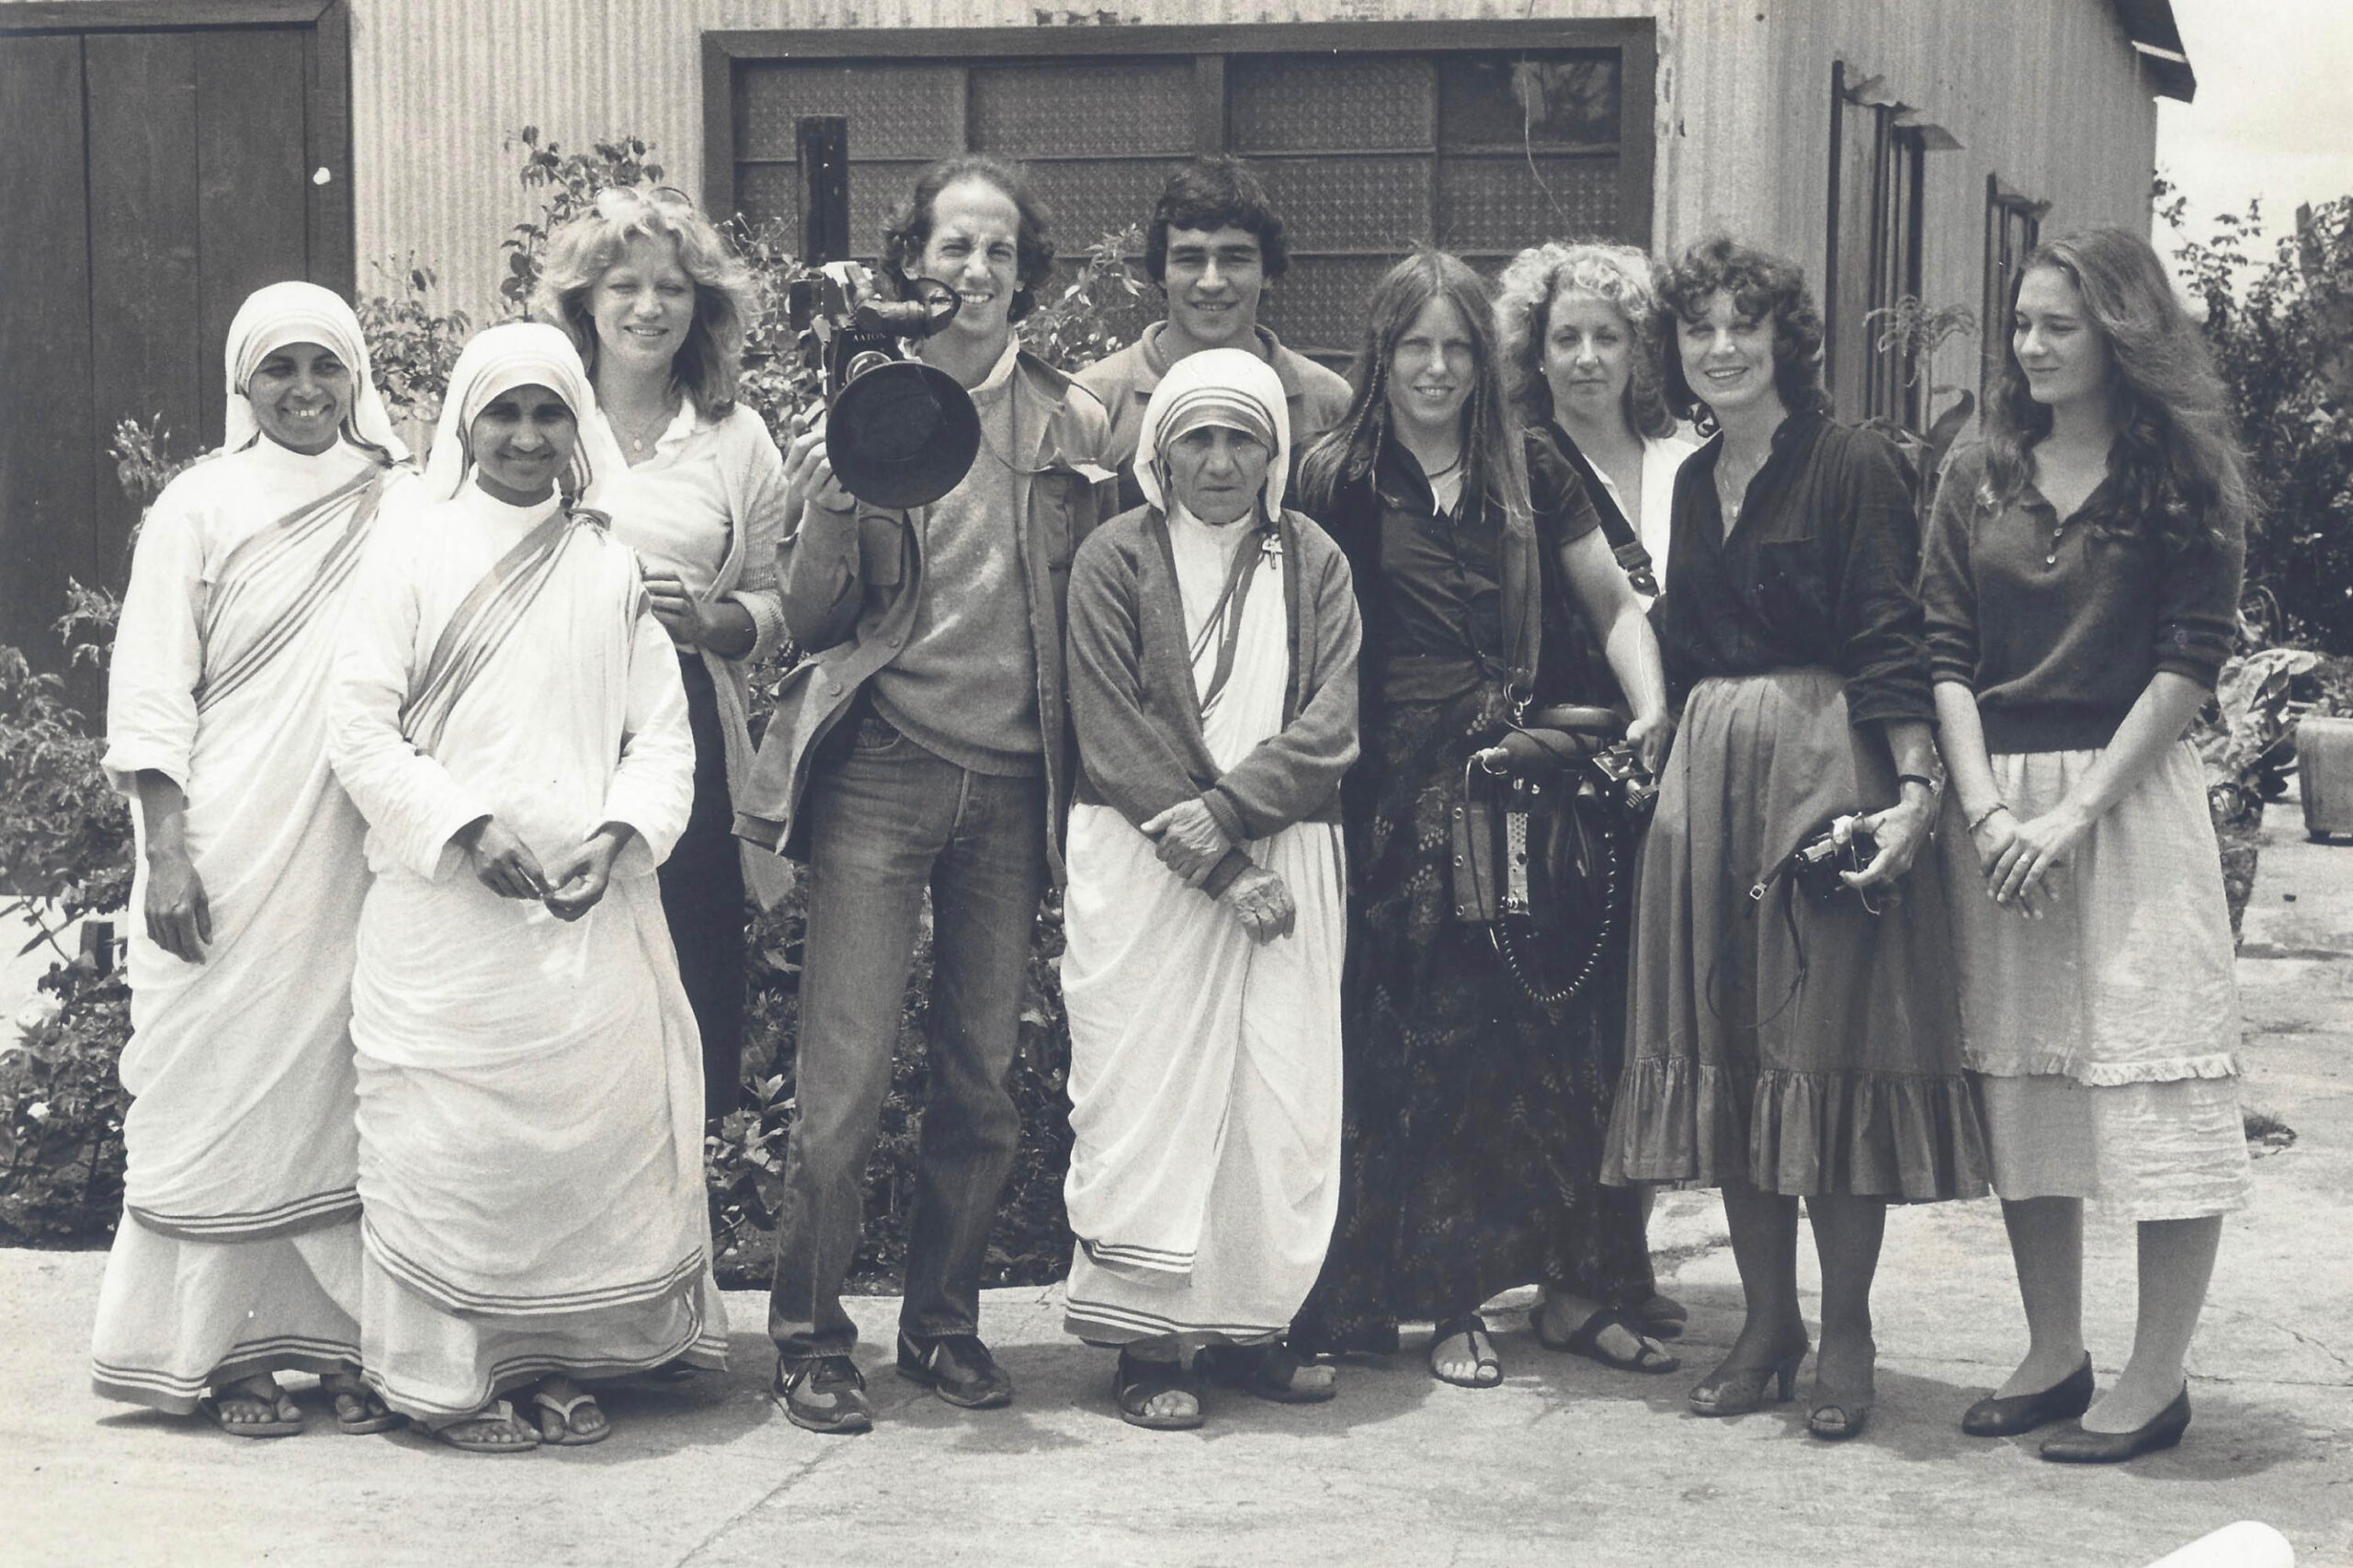 B.B. and the documentary crew with Mother Teresa. Image courtesy of BB St. Roman.